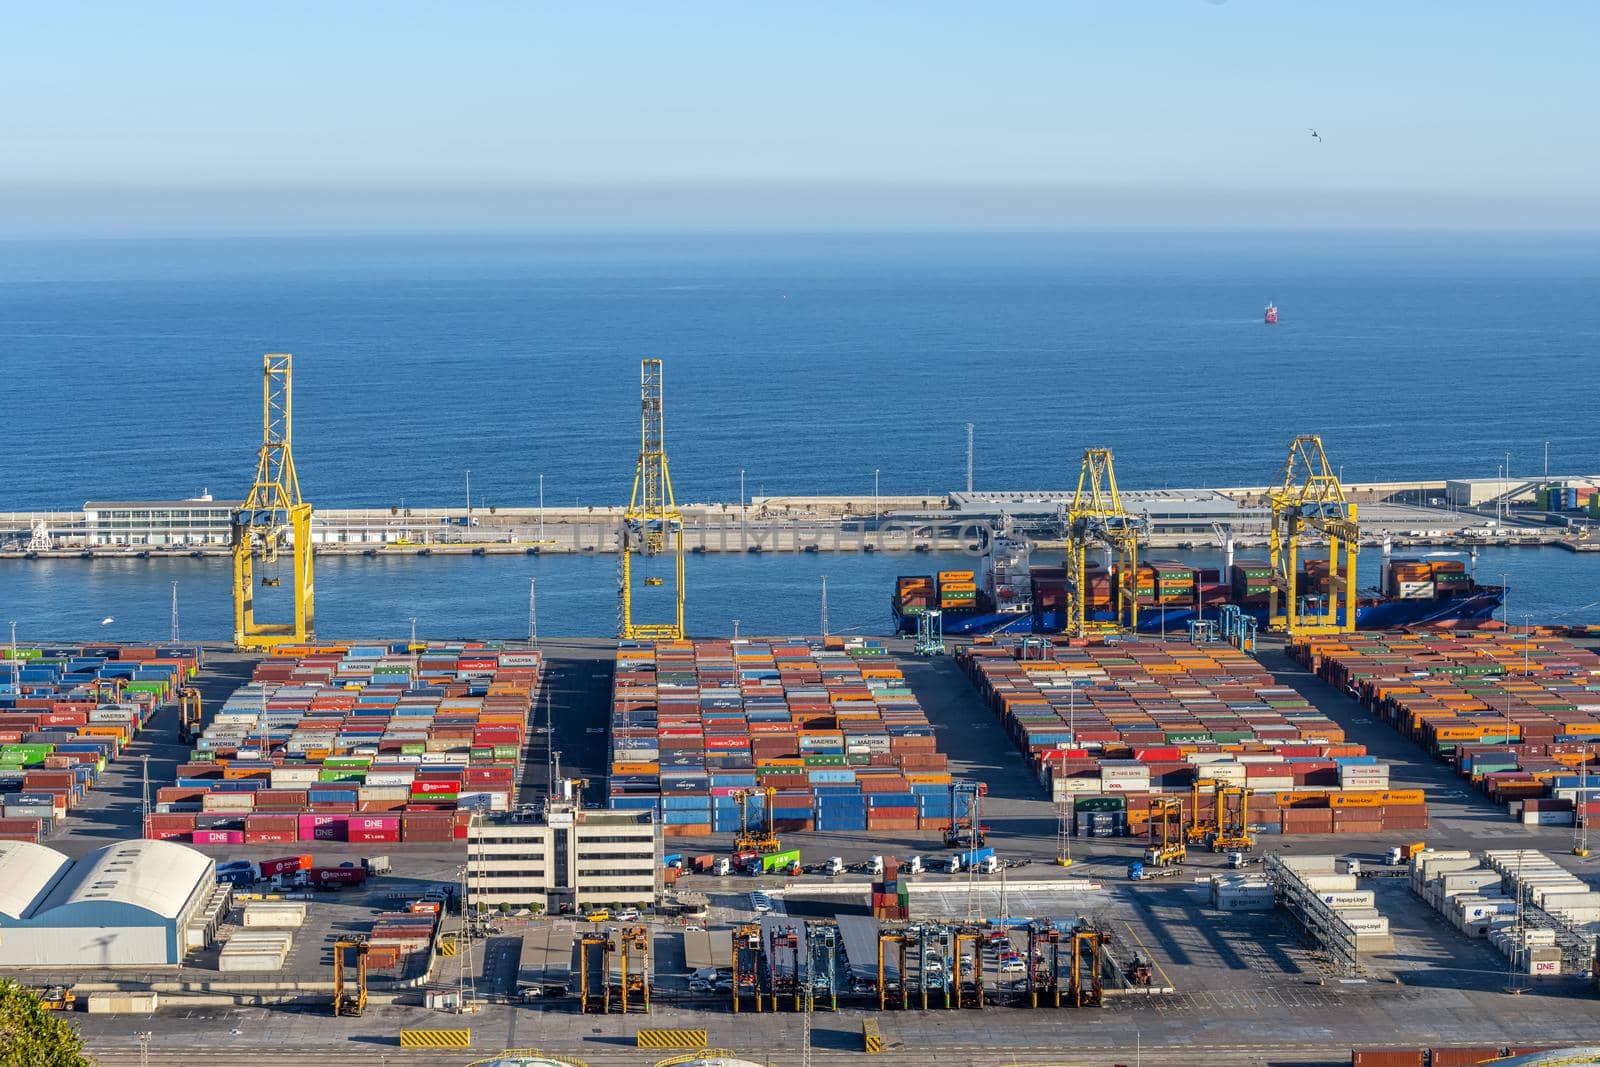 BARCELONA, SPAIN - February 02, 2022: The commercial harbour of Barcelona with containers and cranes